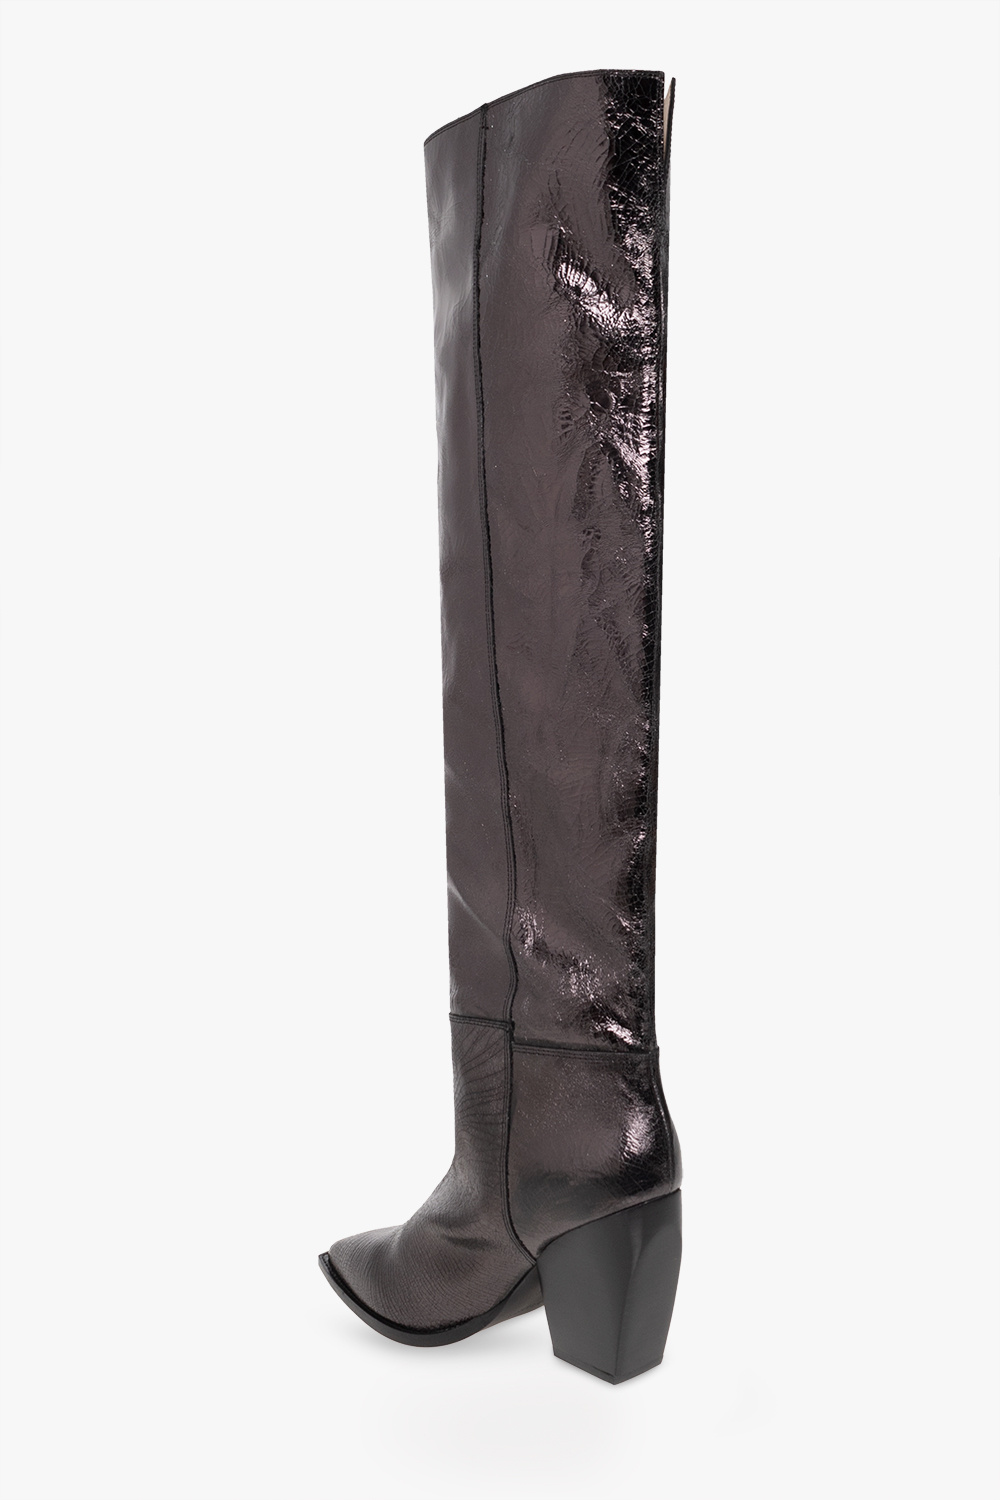 AllSaints ‘Reina’ leather heeled boots